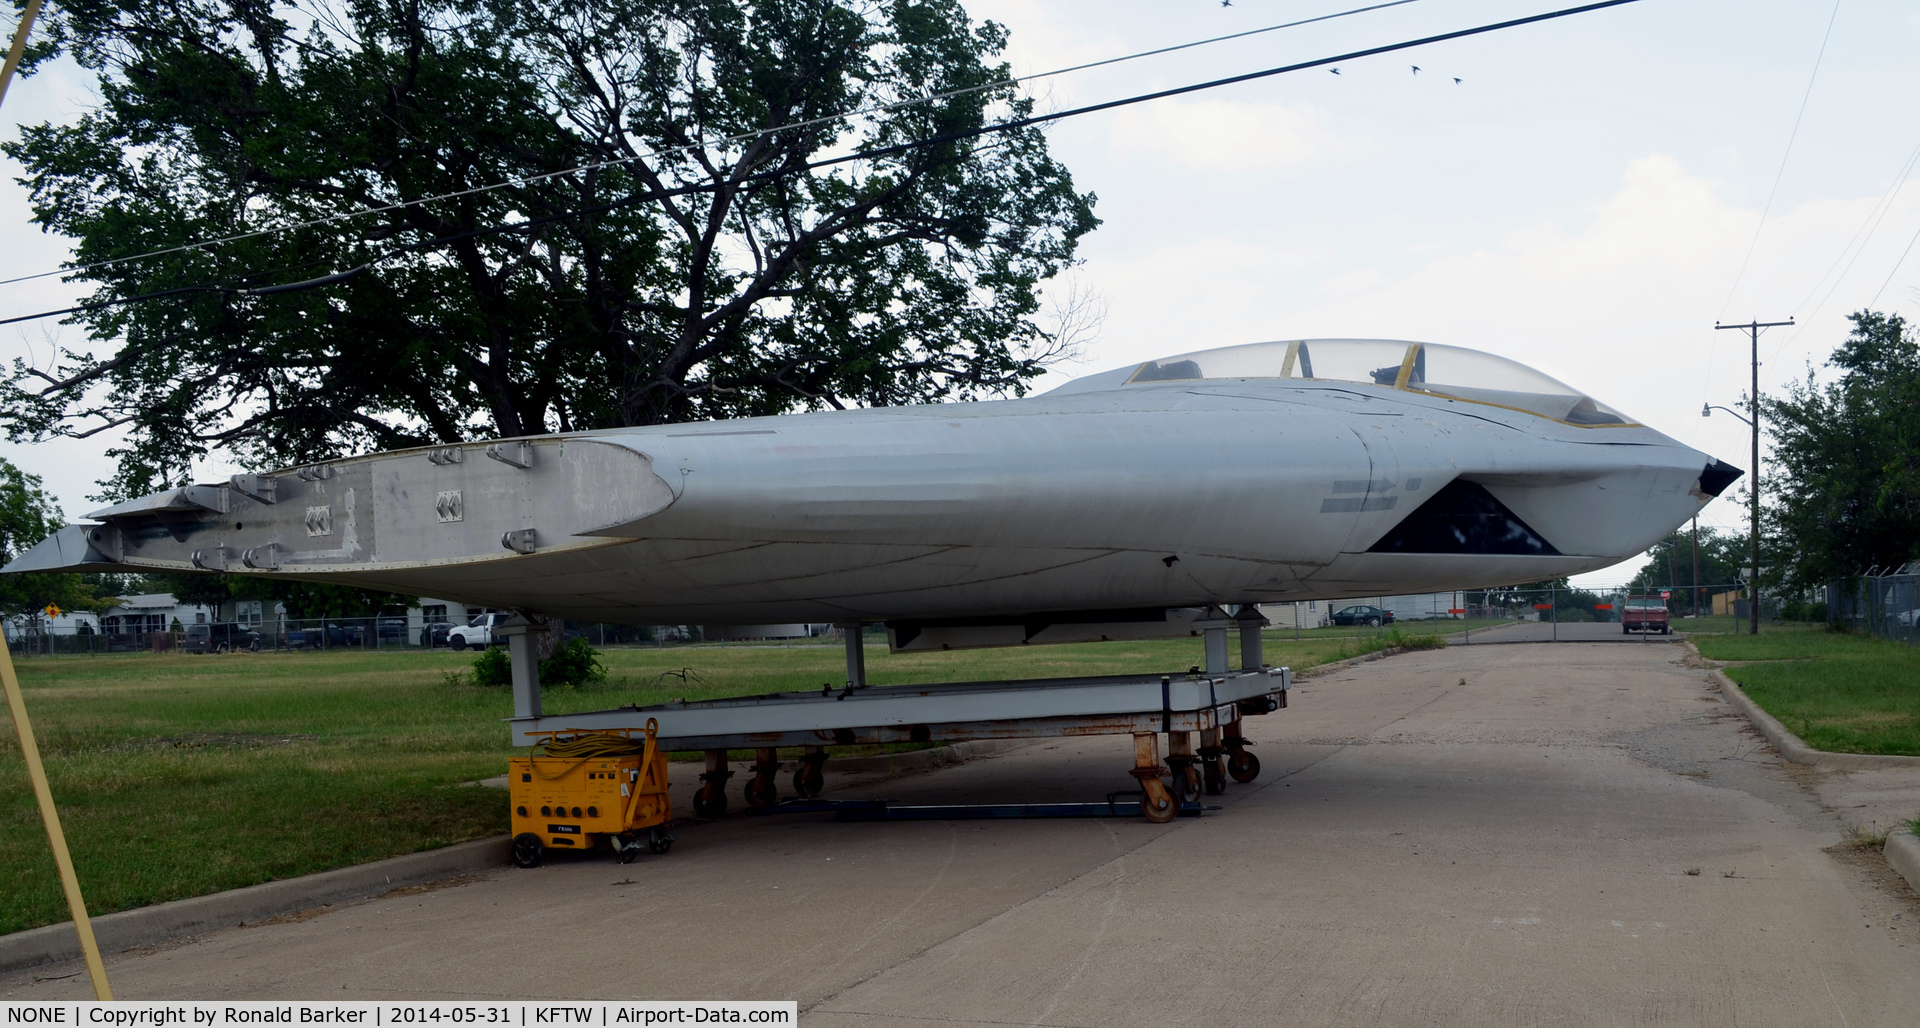 NONE, McDonnell Douglas\General Dynamics A-12 Avenger II C/N unknown, A-12 mockup at the Fort Worth Aviation Museum